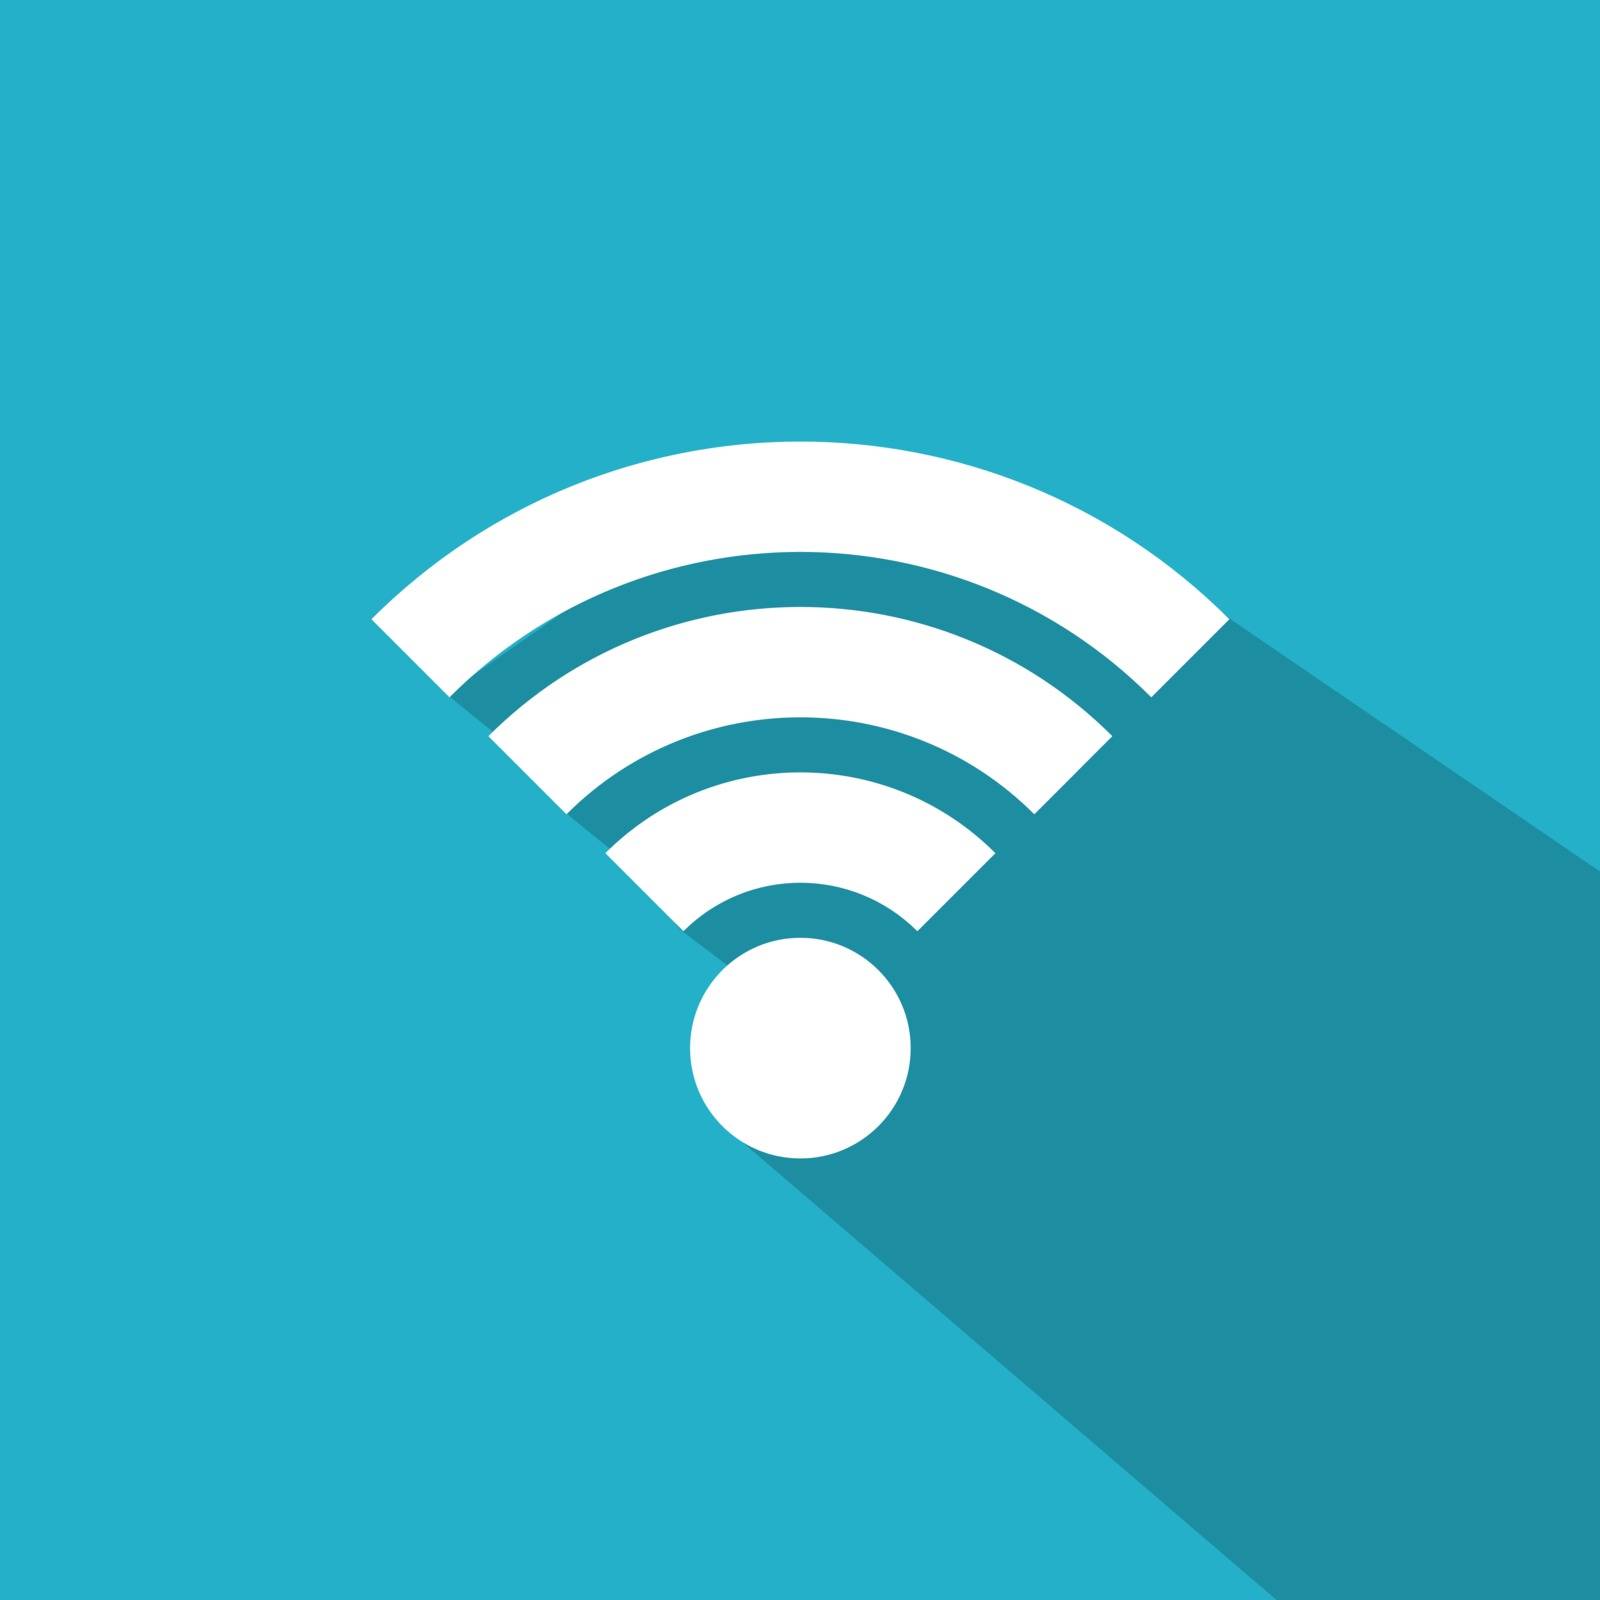 Flat icons for Web and Mobile applications. Wi-Fi icon. Long shadow design